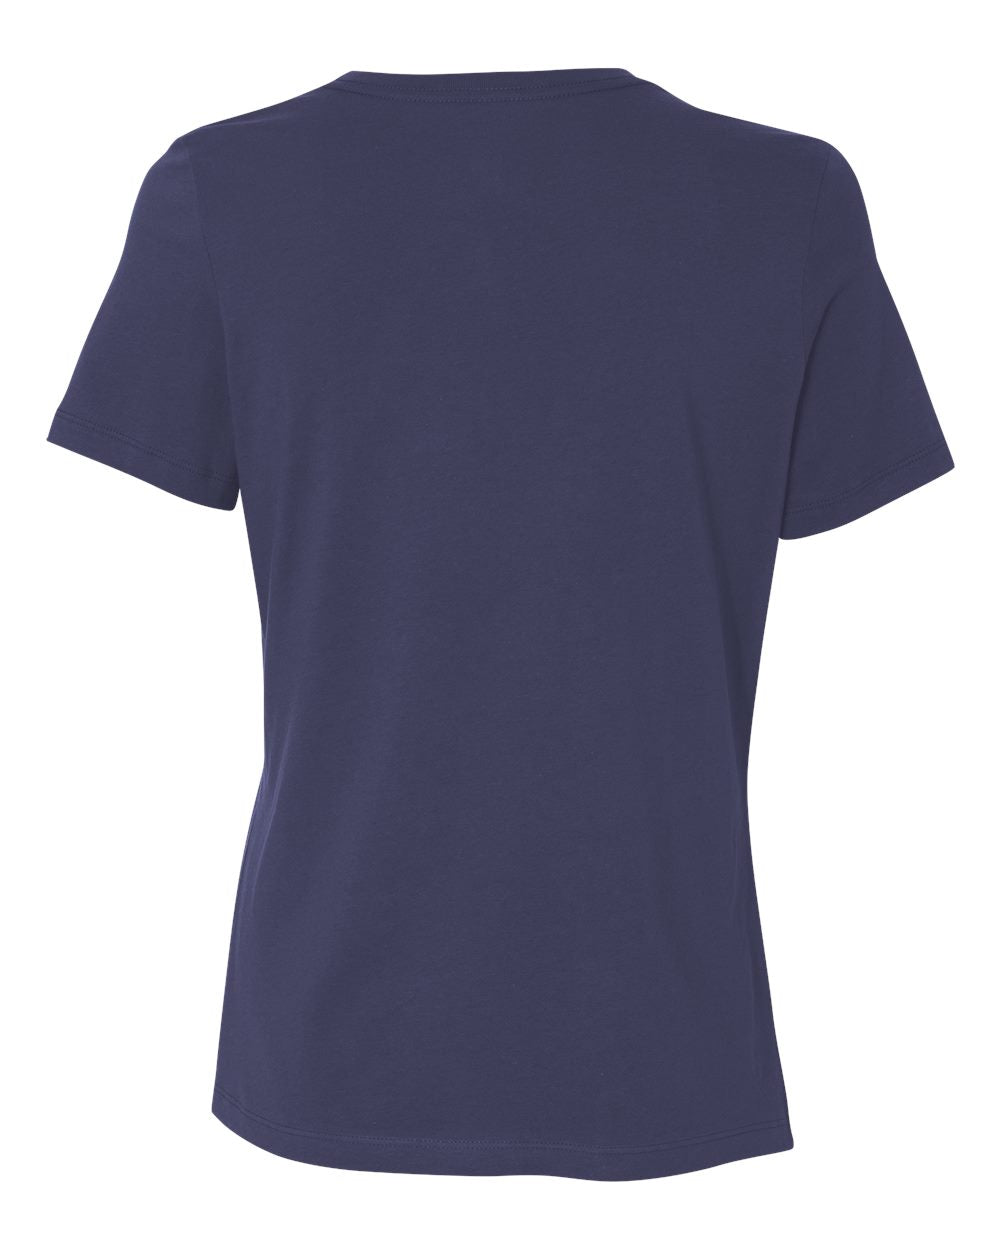 BELLA + CANVAS Women’s Relaxed Jersey Tee 6400 #color_Navy